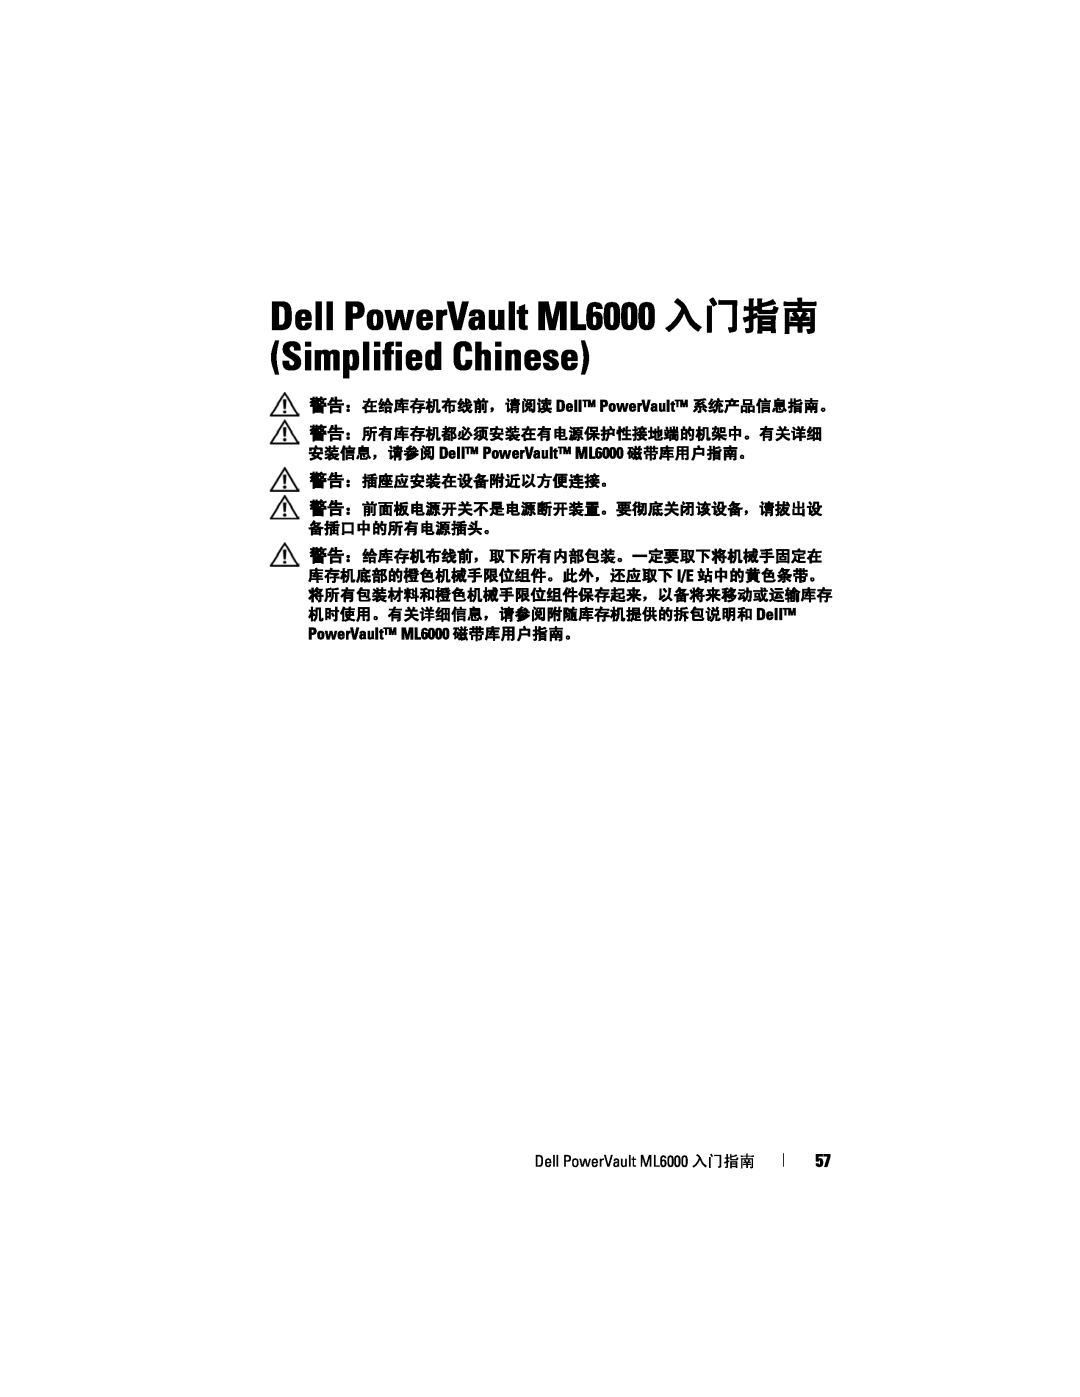 Dell manual Dell PowerVault ML6000 入门指南 Simplified Chinese, 警告：在给库存机布线前，请阅读 Dell PowerVault 系统产品信息指南。 